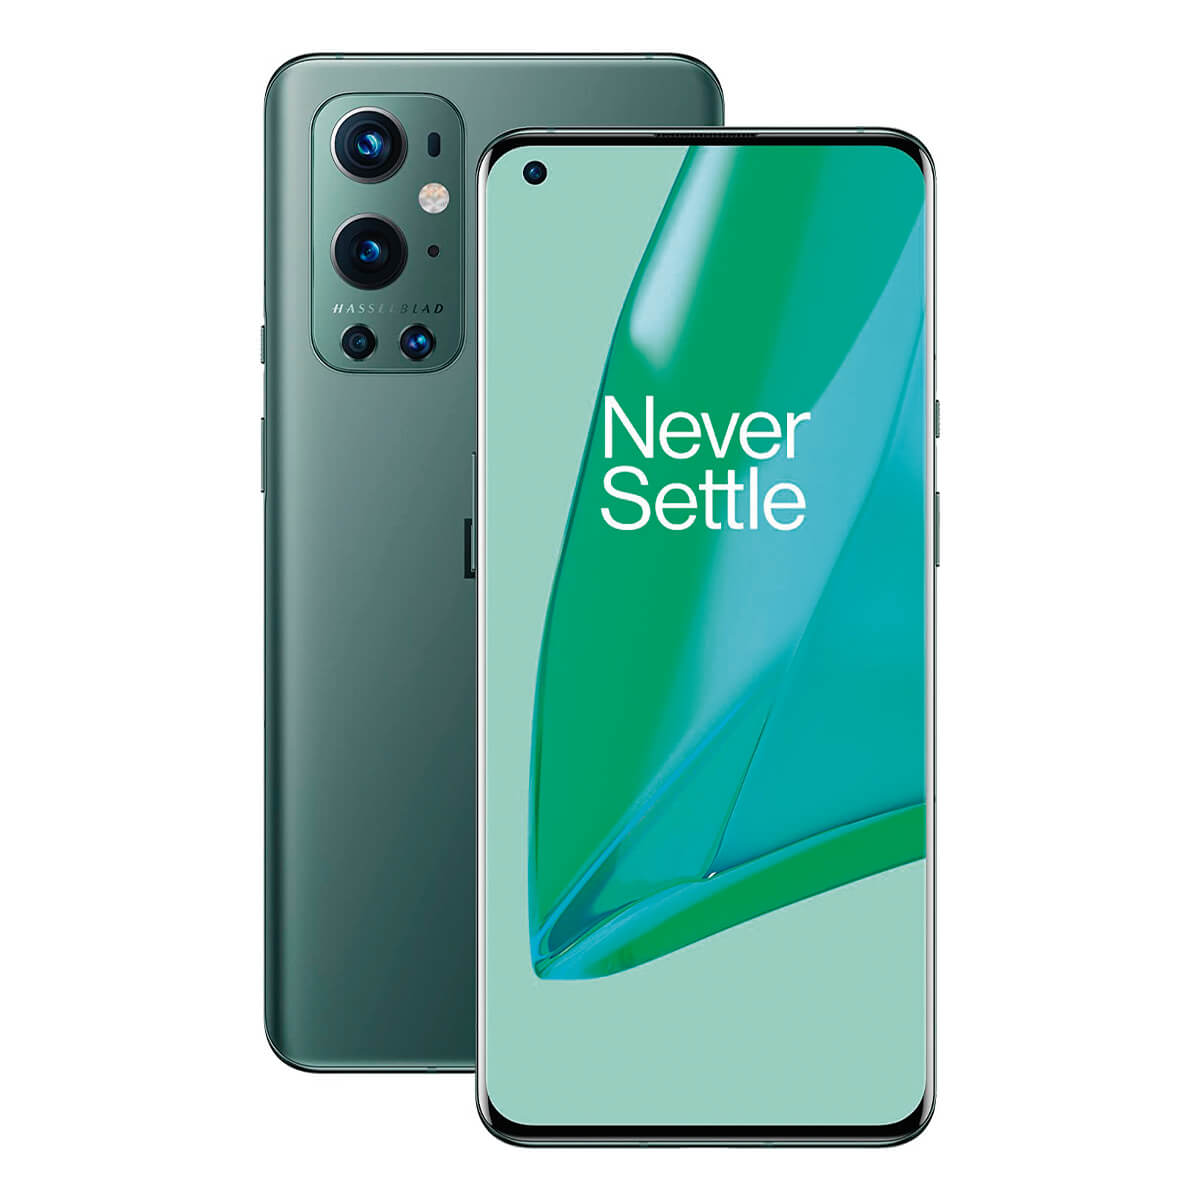 ONEPLUS 9 PRO 5G 8GB/128GB VERDE (FOREST GREEN) DUAL SIM | Móviles libres